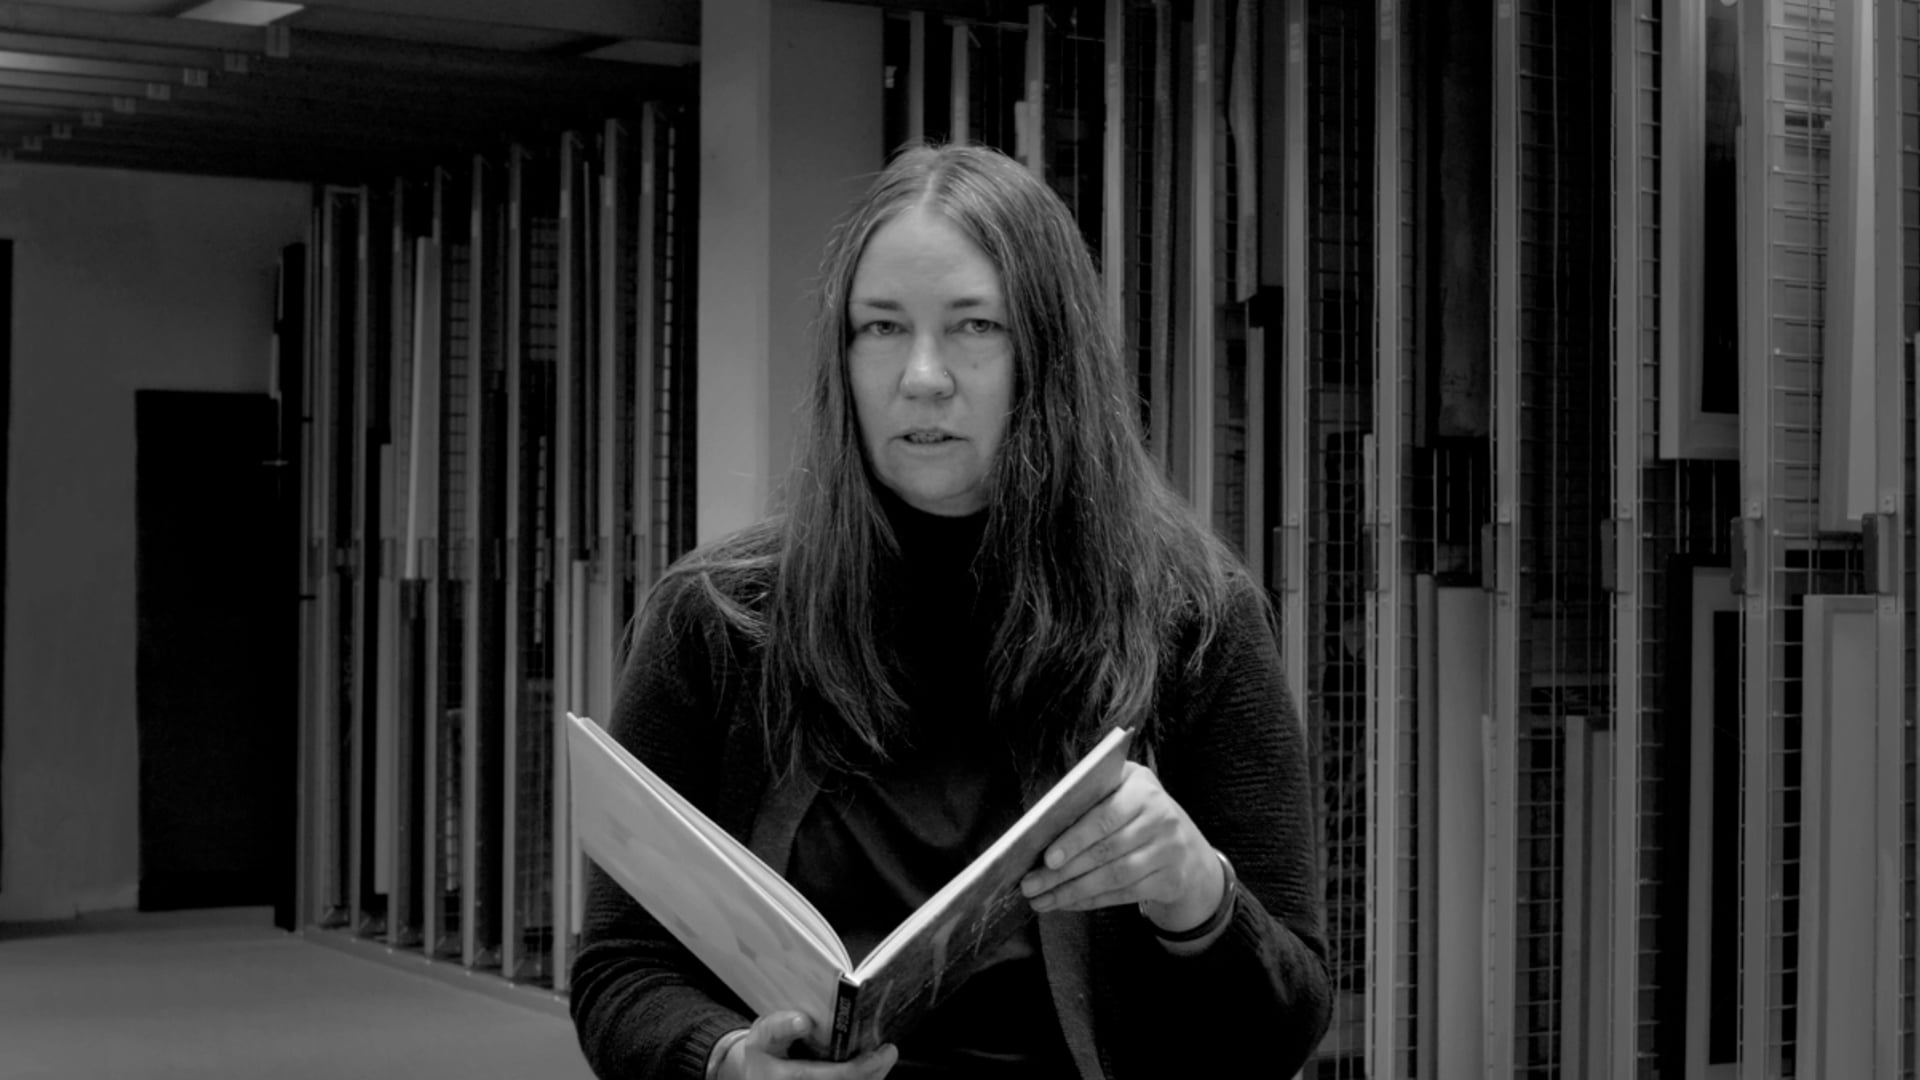 RMIT COLLECTIONS VIDEO SERIES: YHONNIE SCARCE